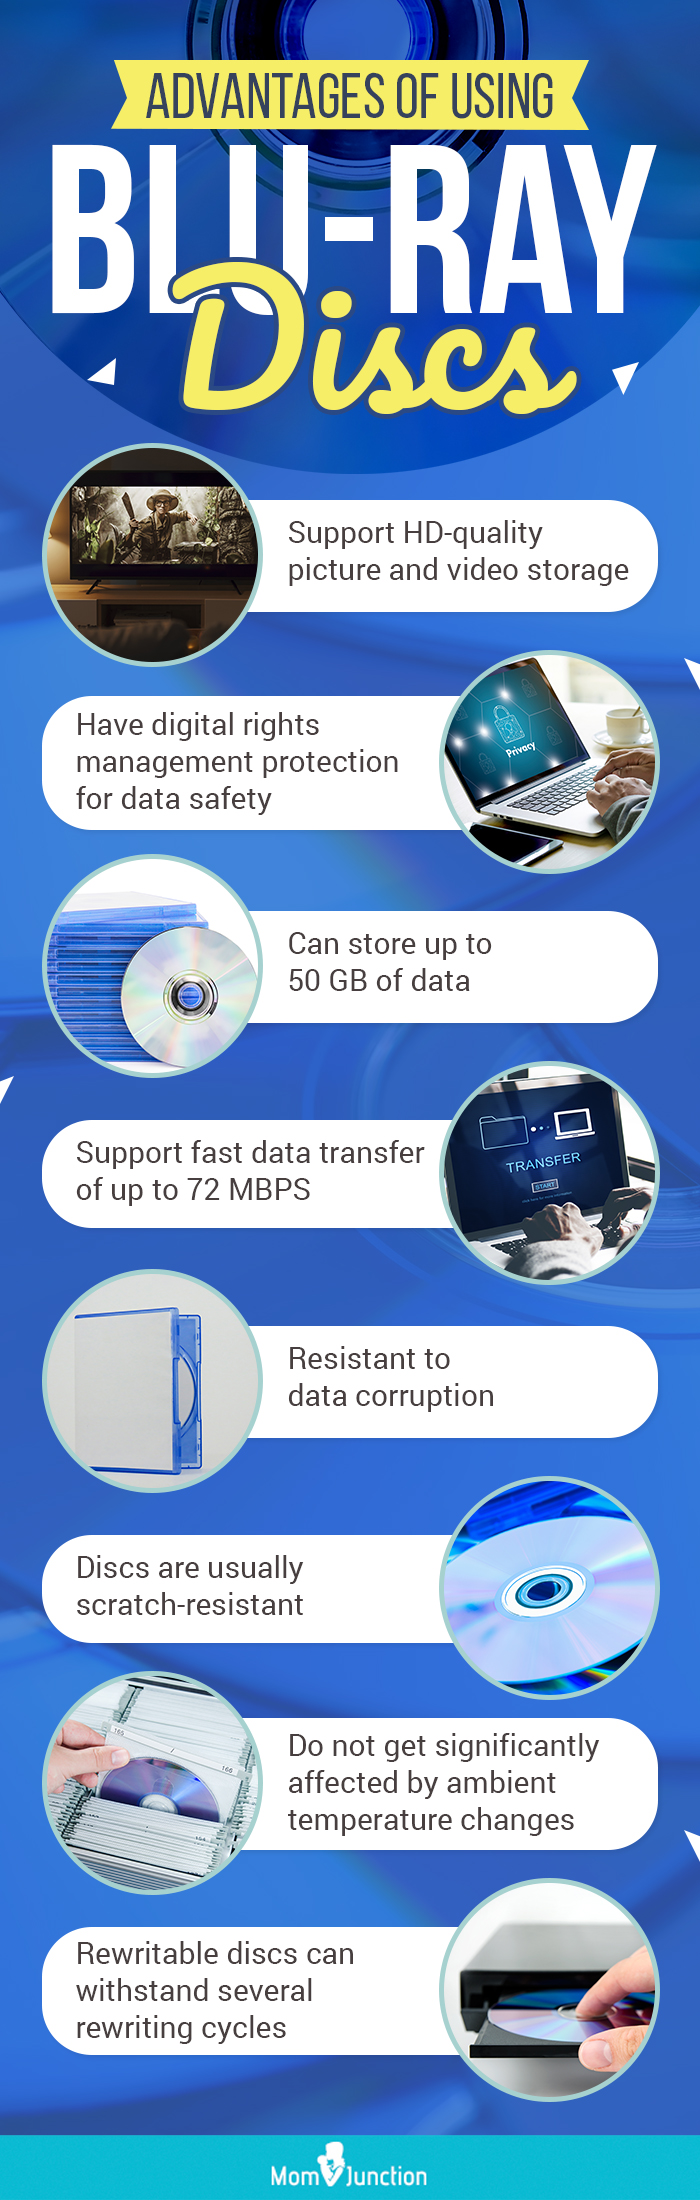 Advantages-Of-Using-Blu-ray-Discs (infographic)